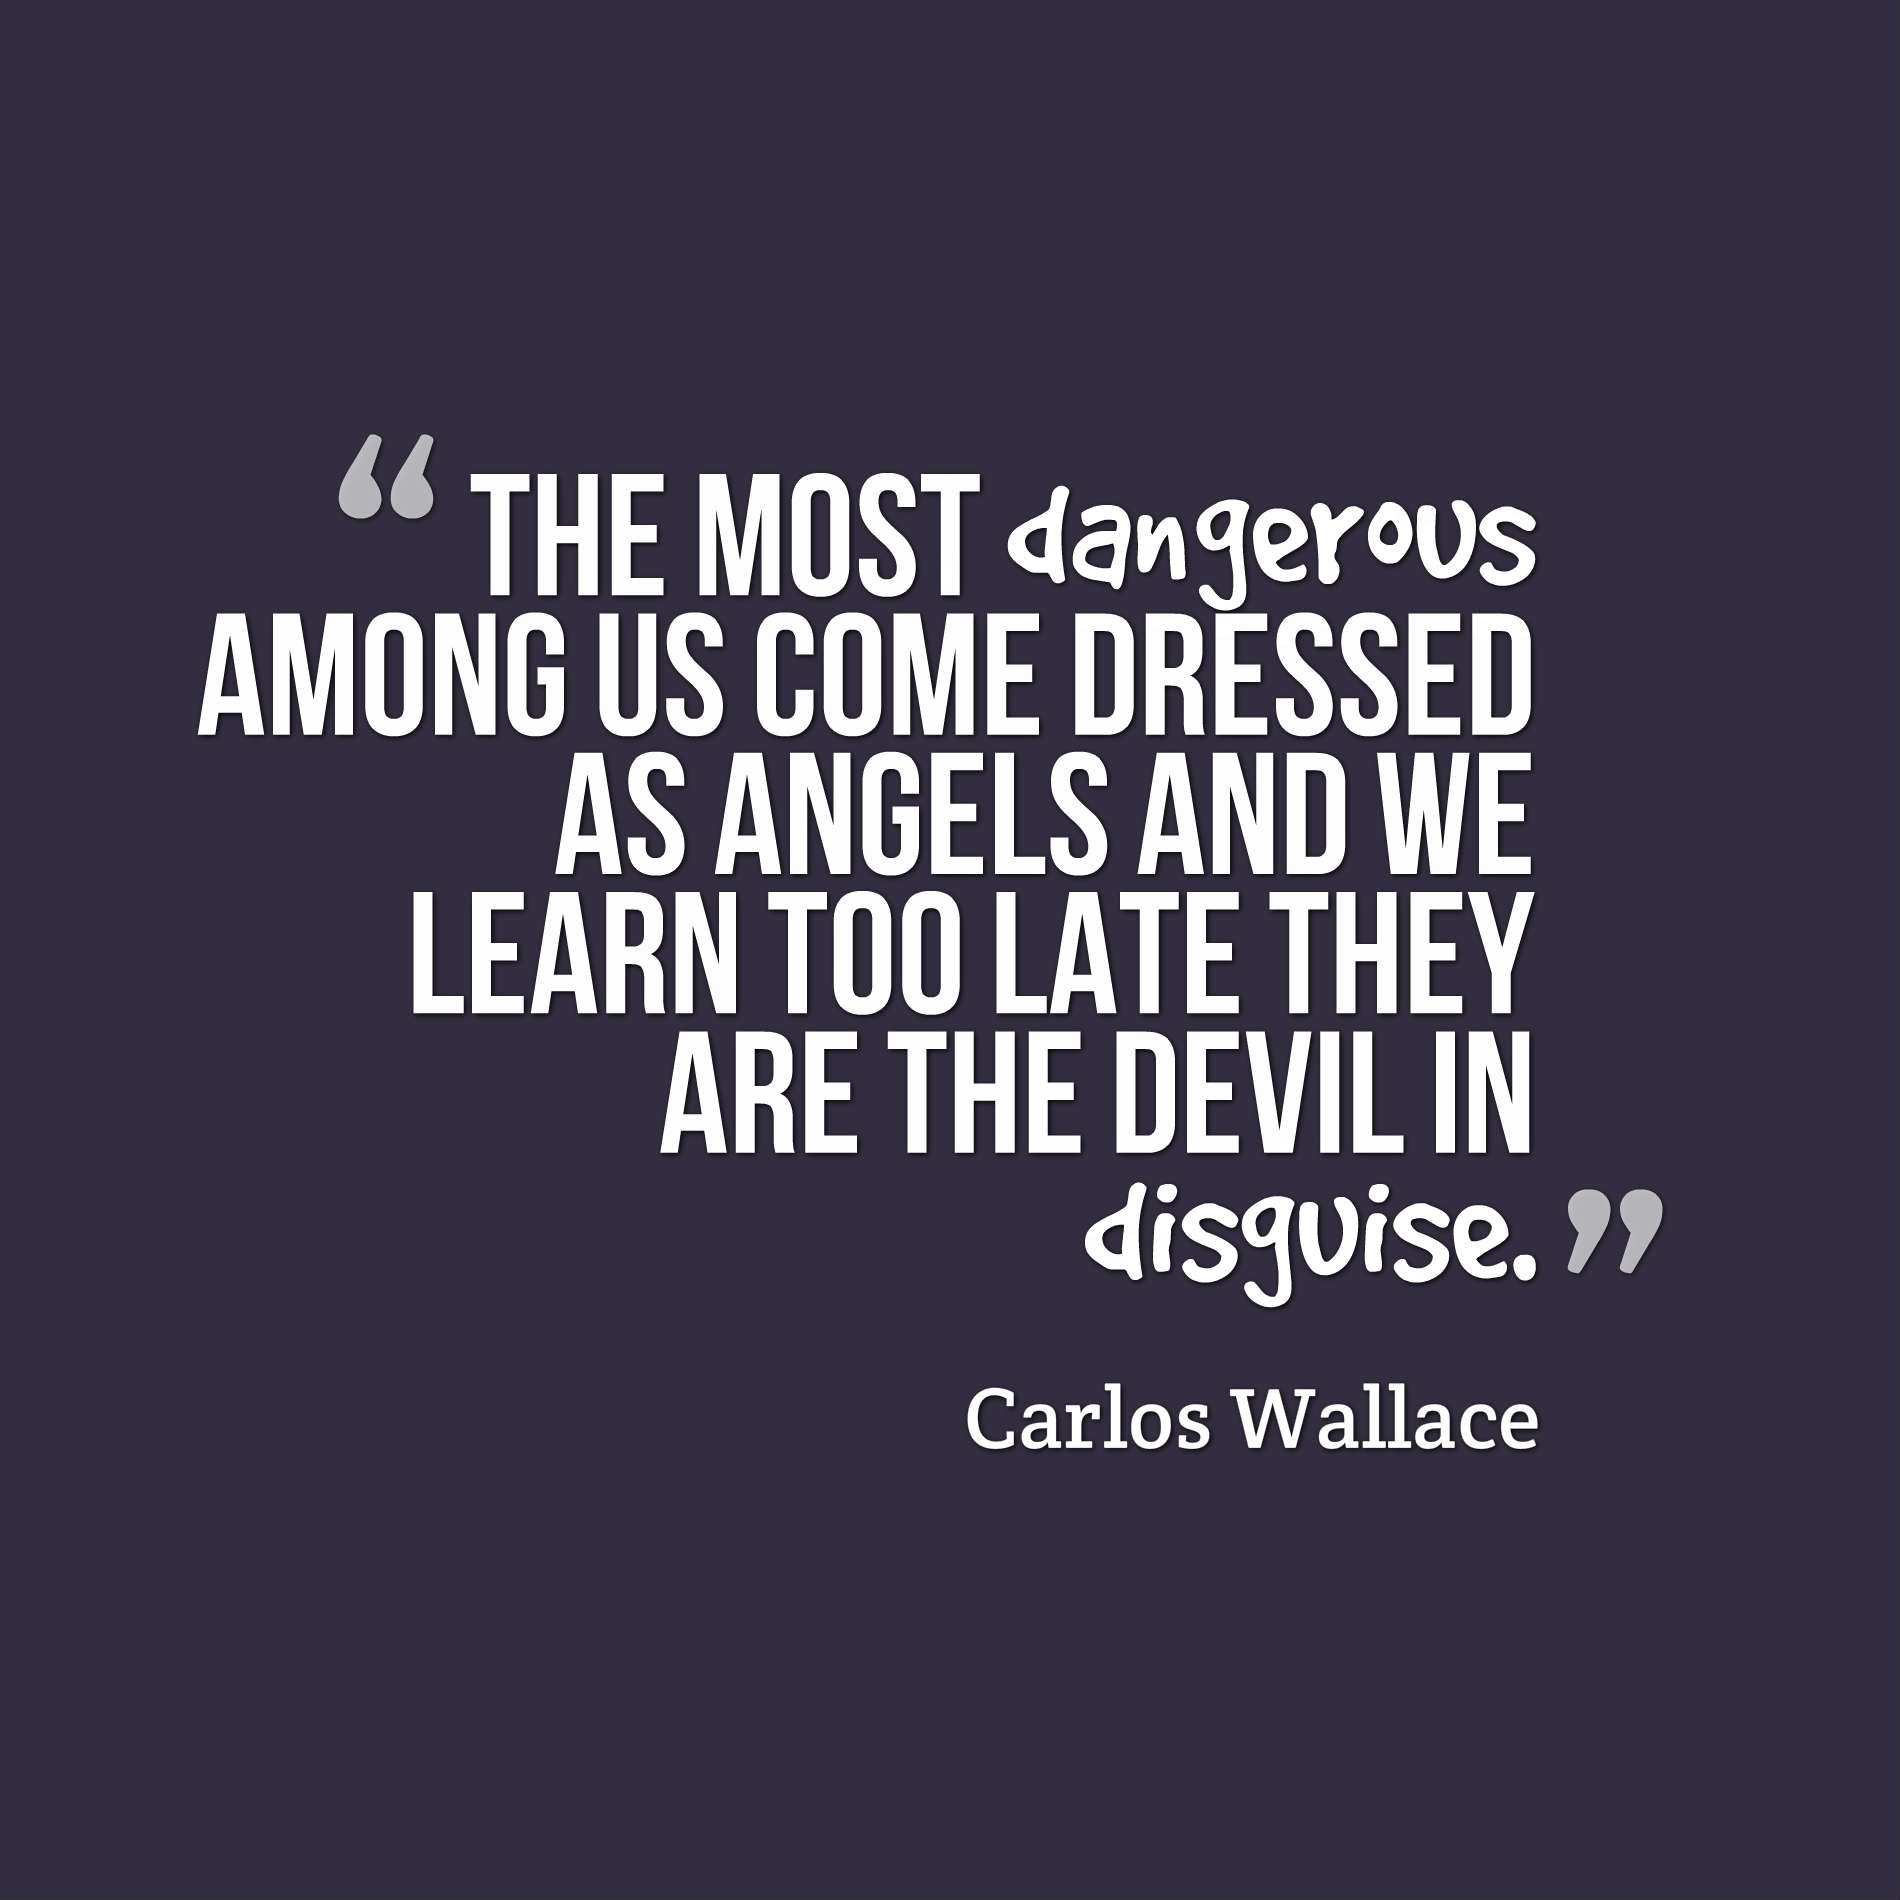 The most dangerous among us come dressed as angels and we learn too late they are the devil in disguise.